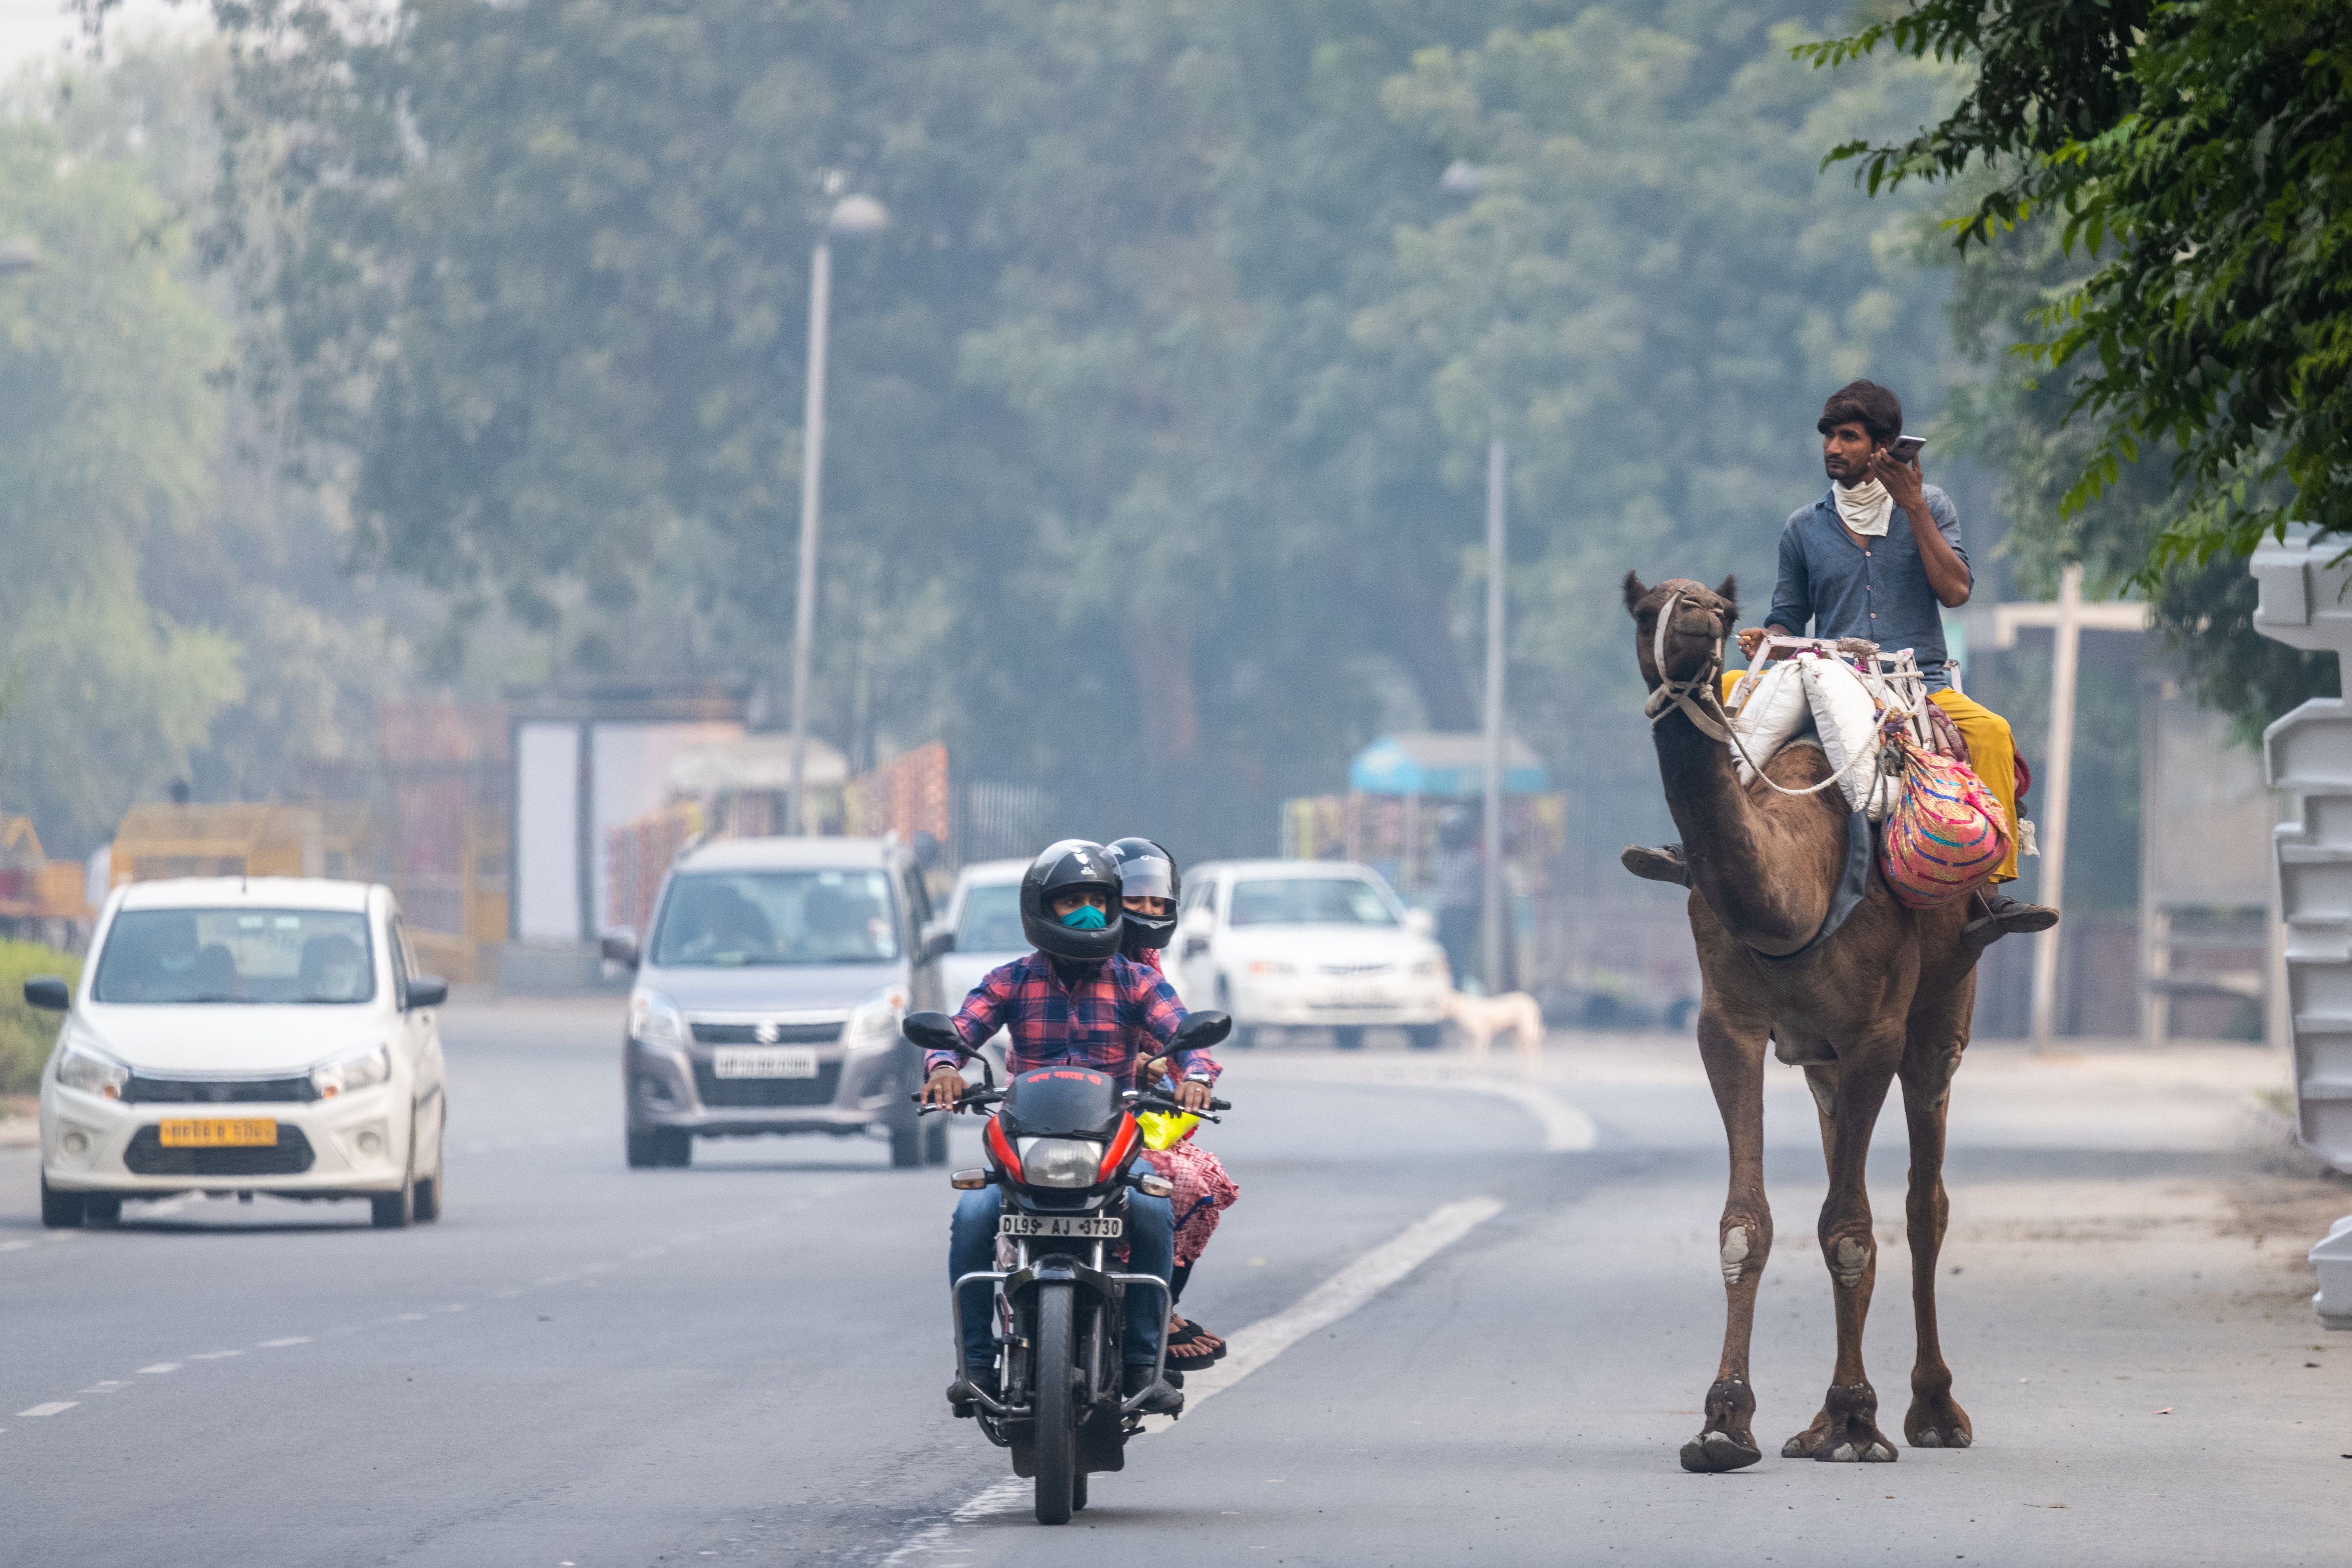 A man rides his camel along a street amid smoggy conditions in Delhi on 5 November, 2020